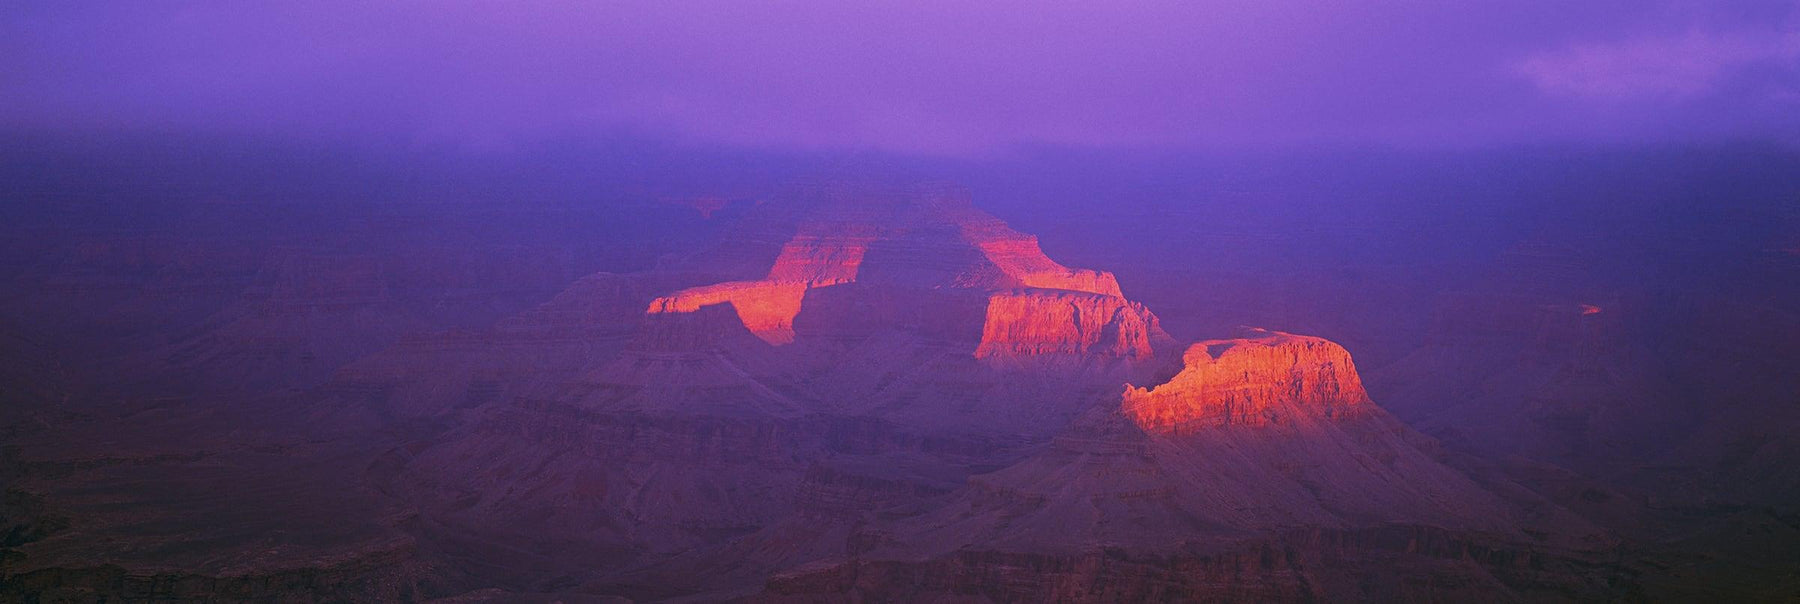 Sunlight hitting the side of the Grand Canyon Arizona during a cloudy day